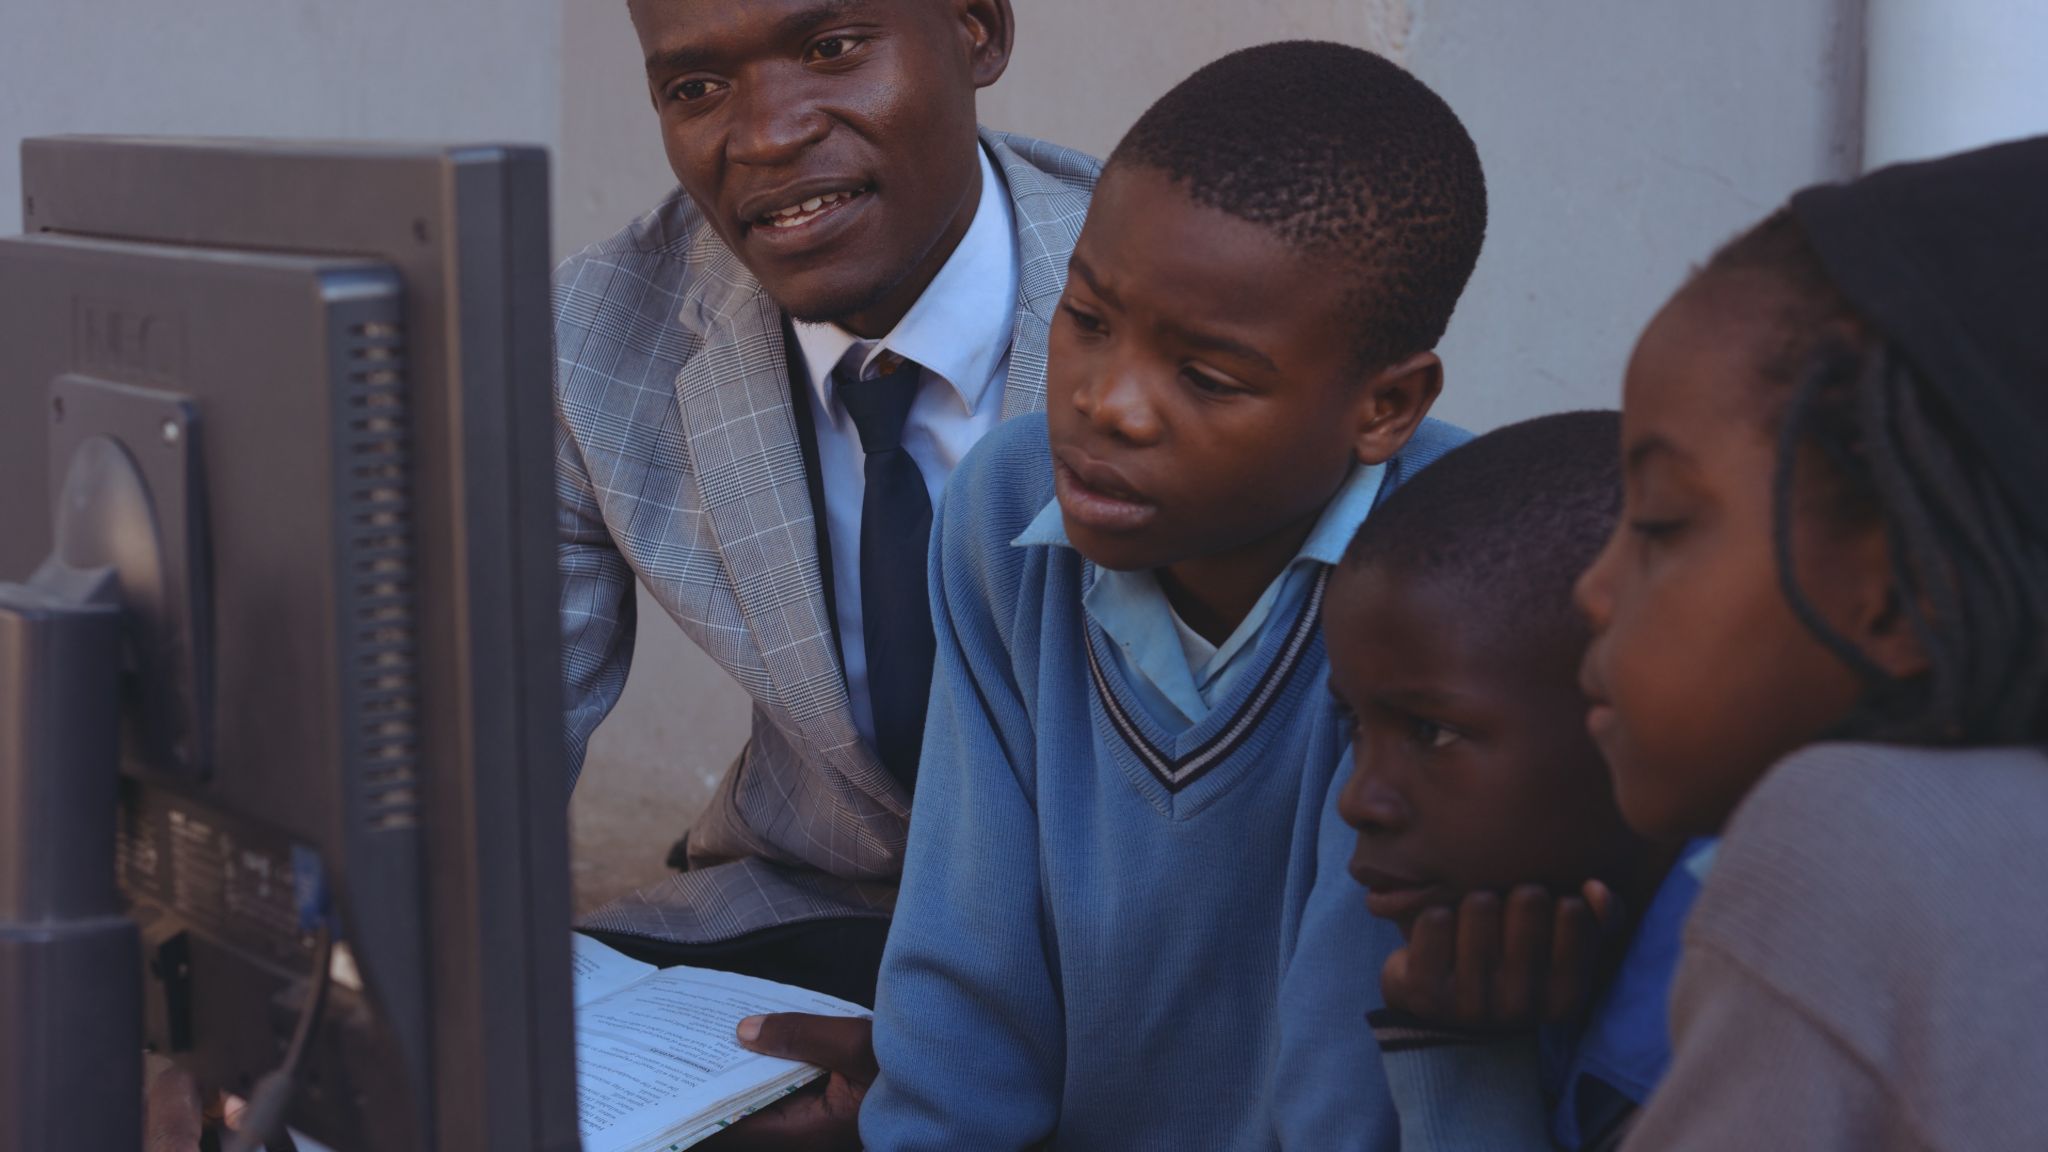 African American male teacher showing two African American boys and a girl something on a computer